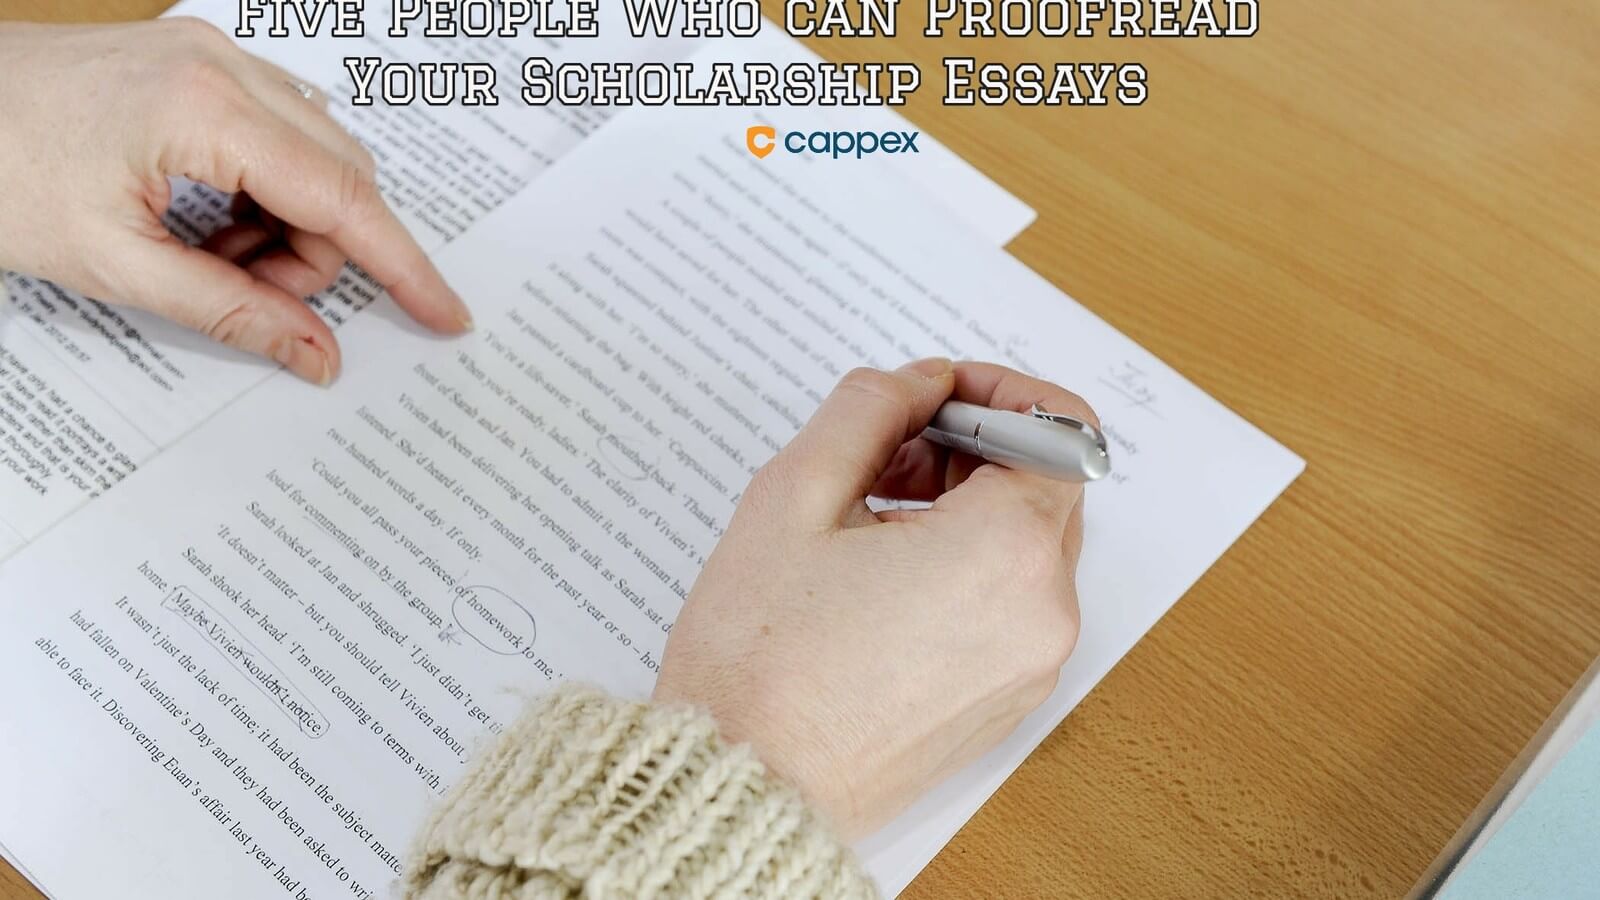 5 People Who Can Proofread Your Scholarship Essays